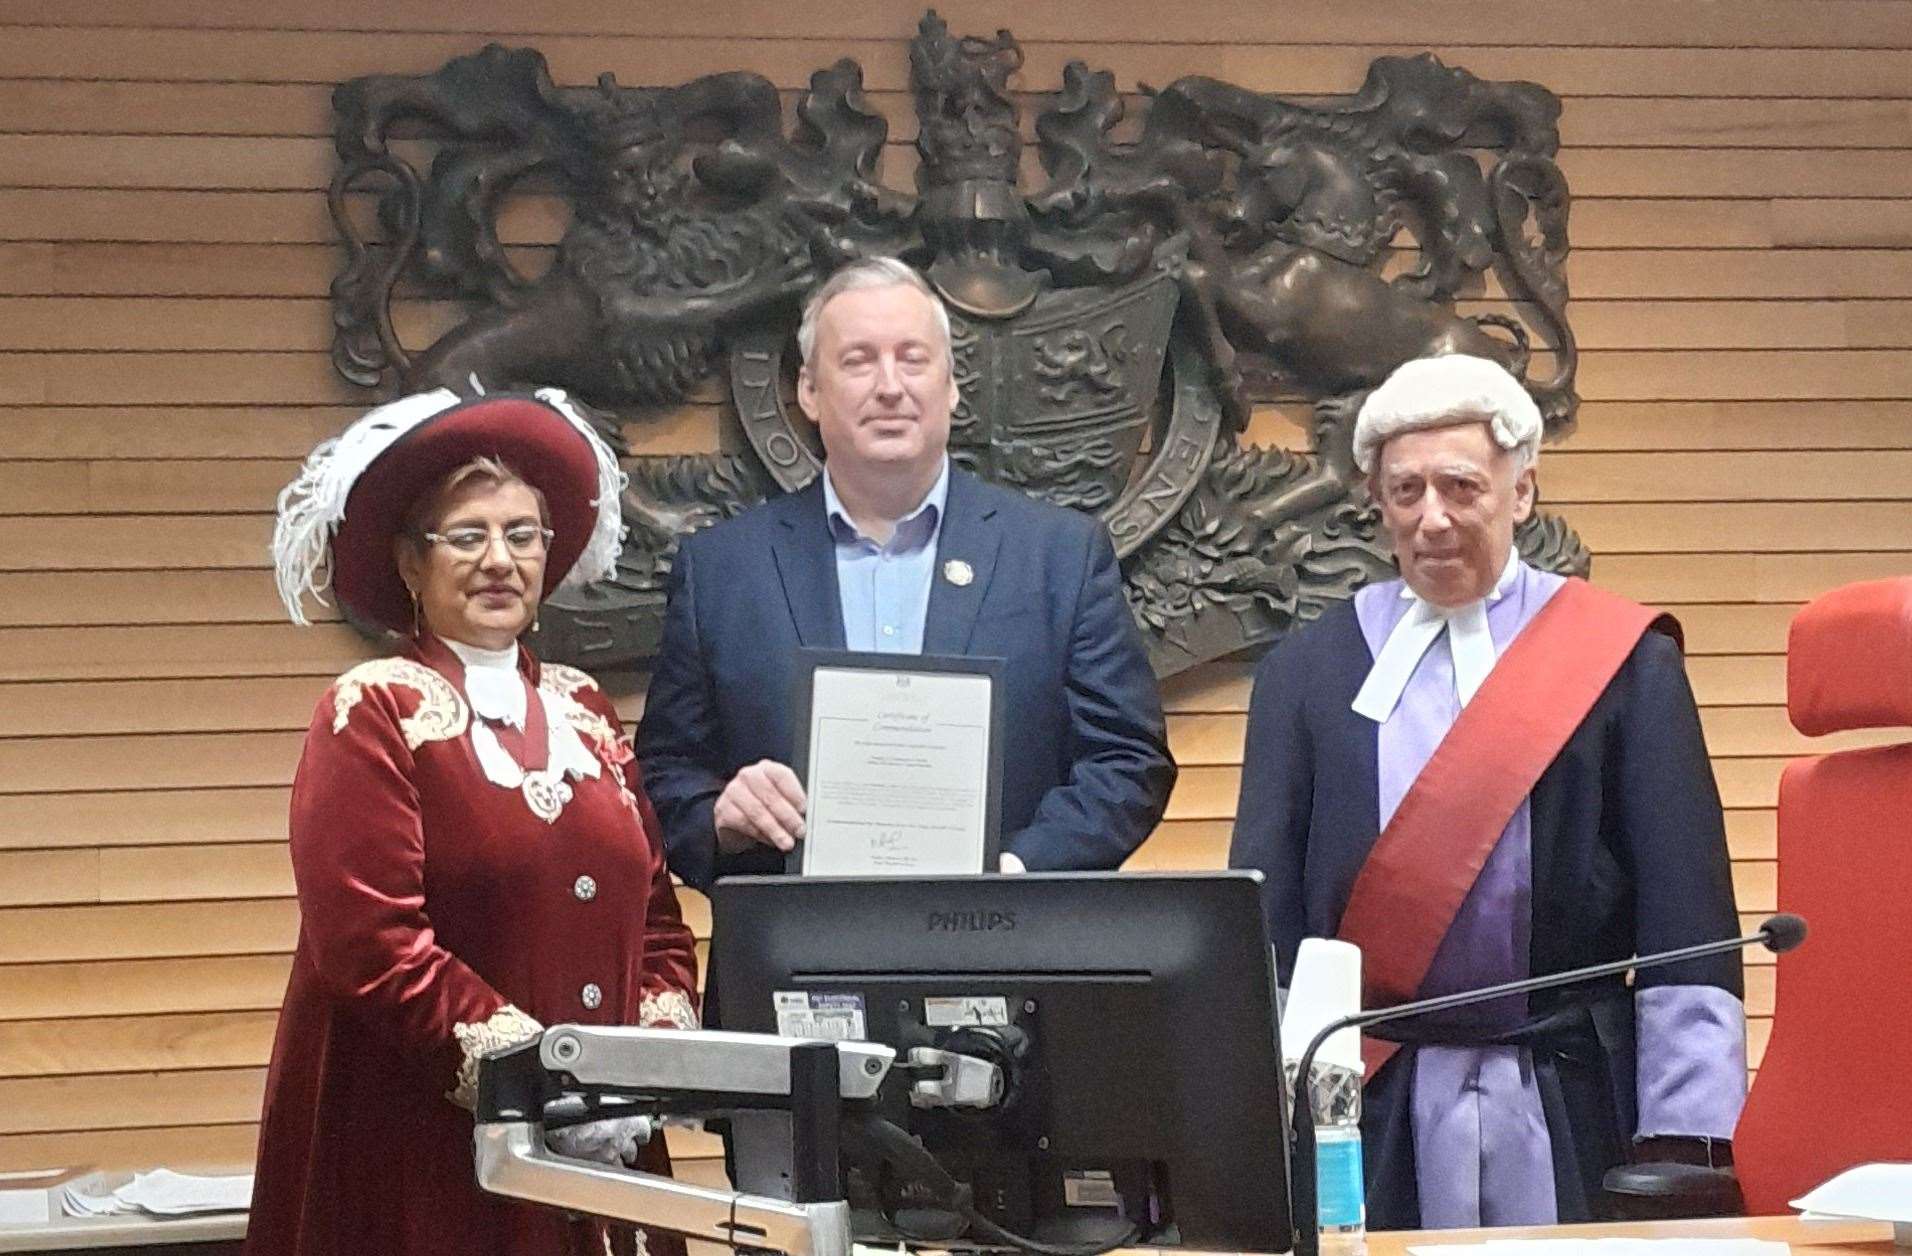 From left: High Sheriff of Kent Nadra Ahmed presents a bravery award to Lee Hawkes watched by Judge Philip Statman at Maidstone Crown Court